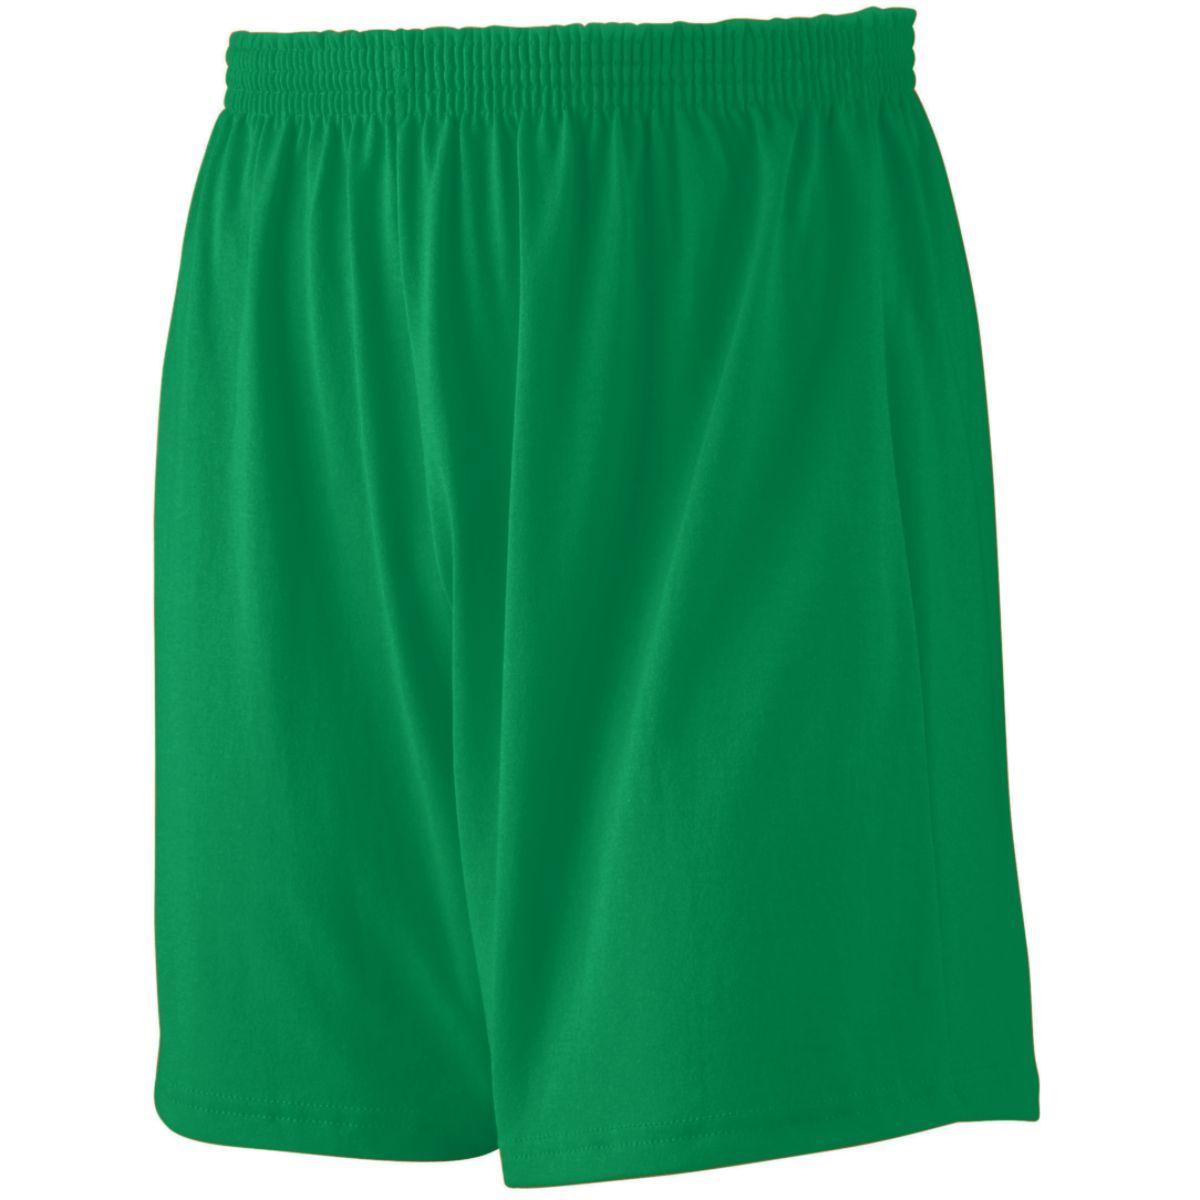 Augusta Sportswear Jersey Knit Shorts in Kelly  -Part of the Adult, Adult-Shorts, Augusta-Products product lines at KanaleyCreations.com